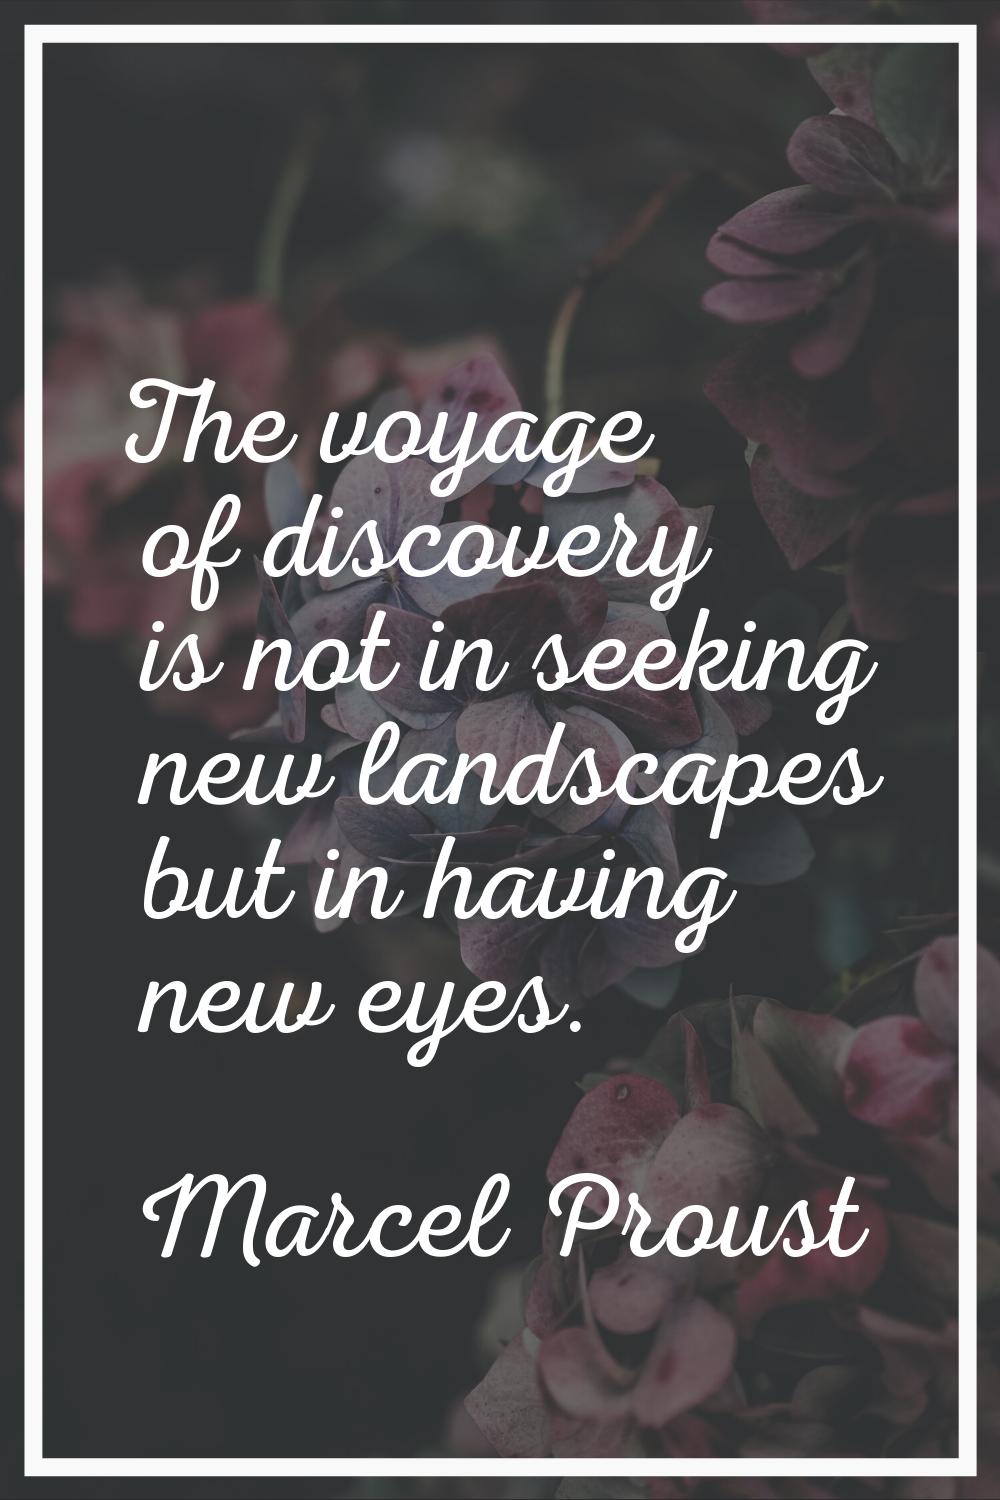 The voyage of discovery is not in seeking new landscapes but in having new eyes.